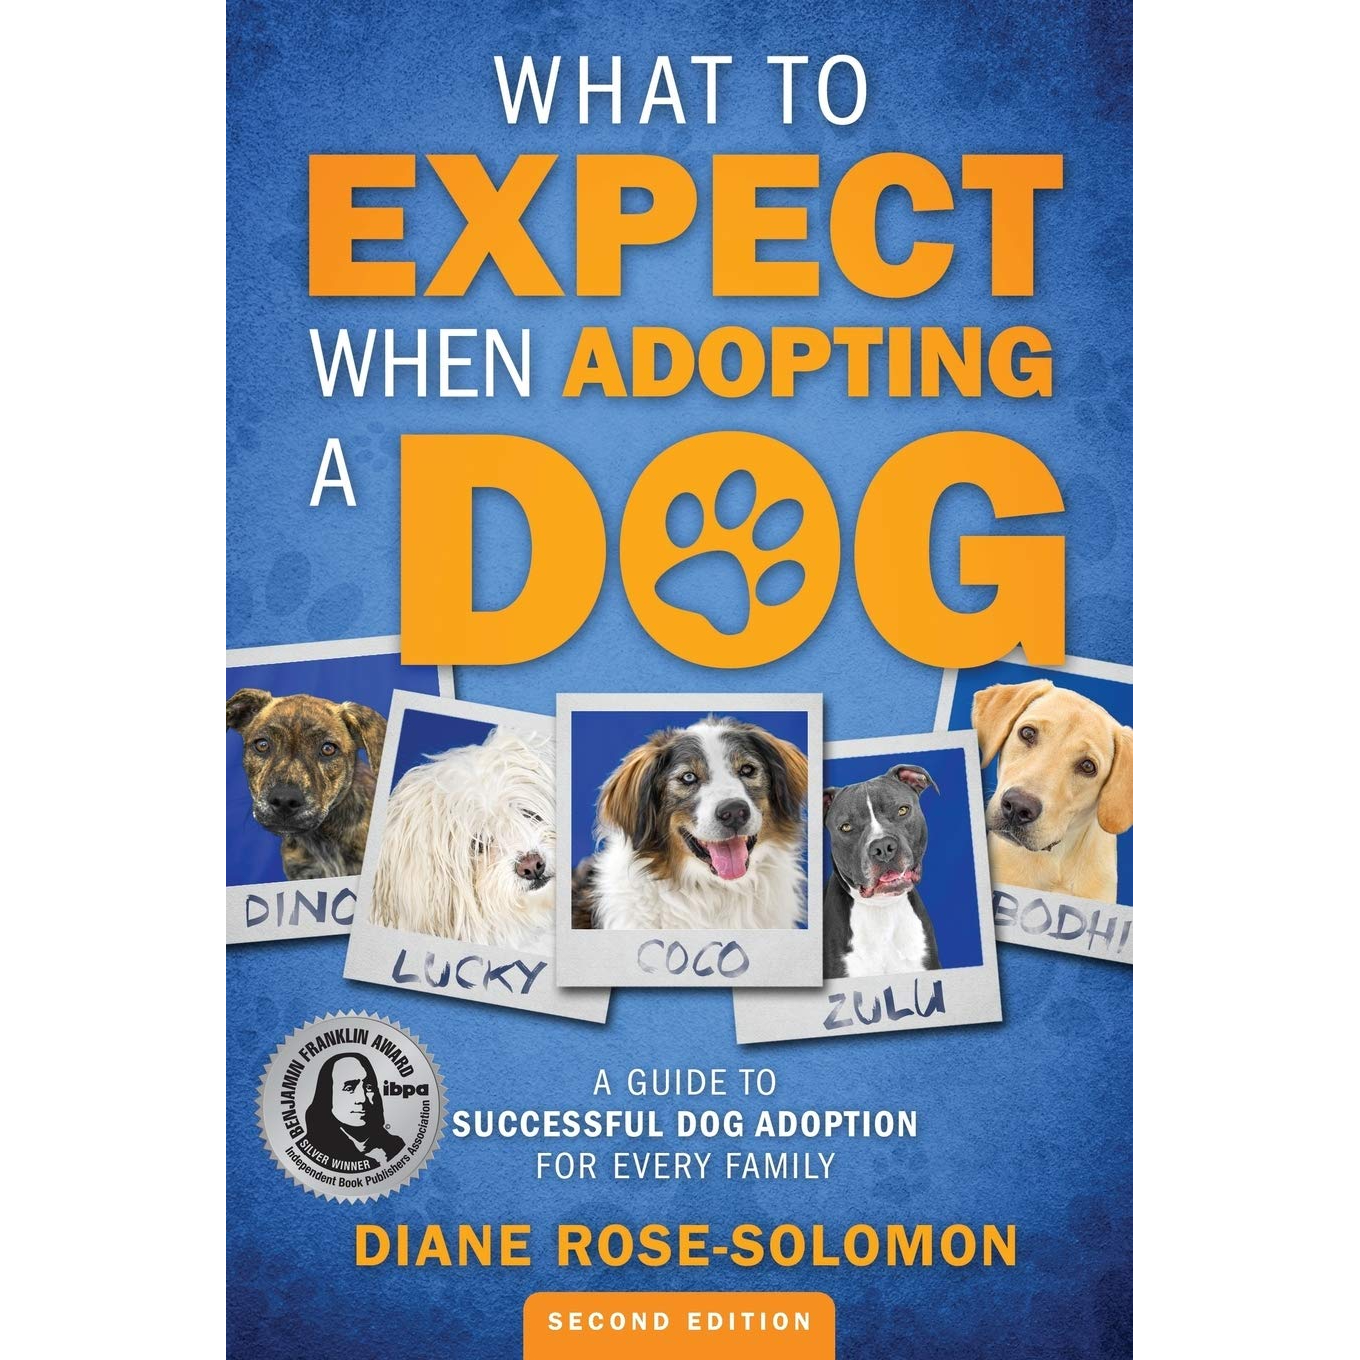 What to Expect When Adopting a Dog